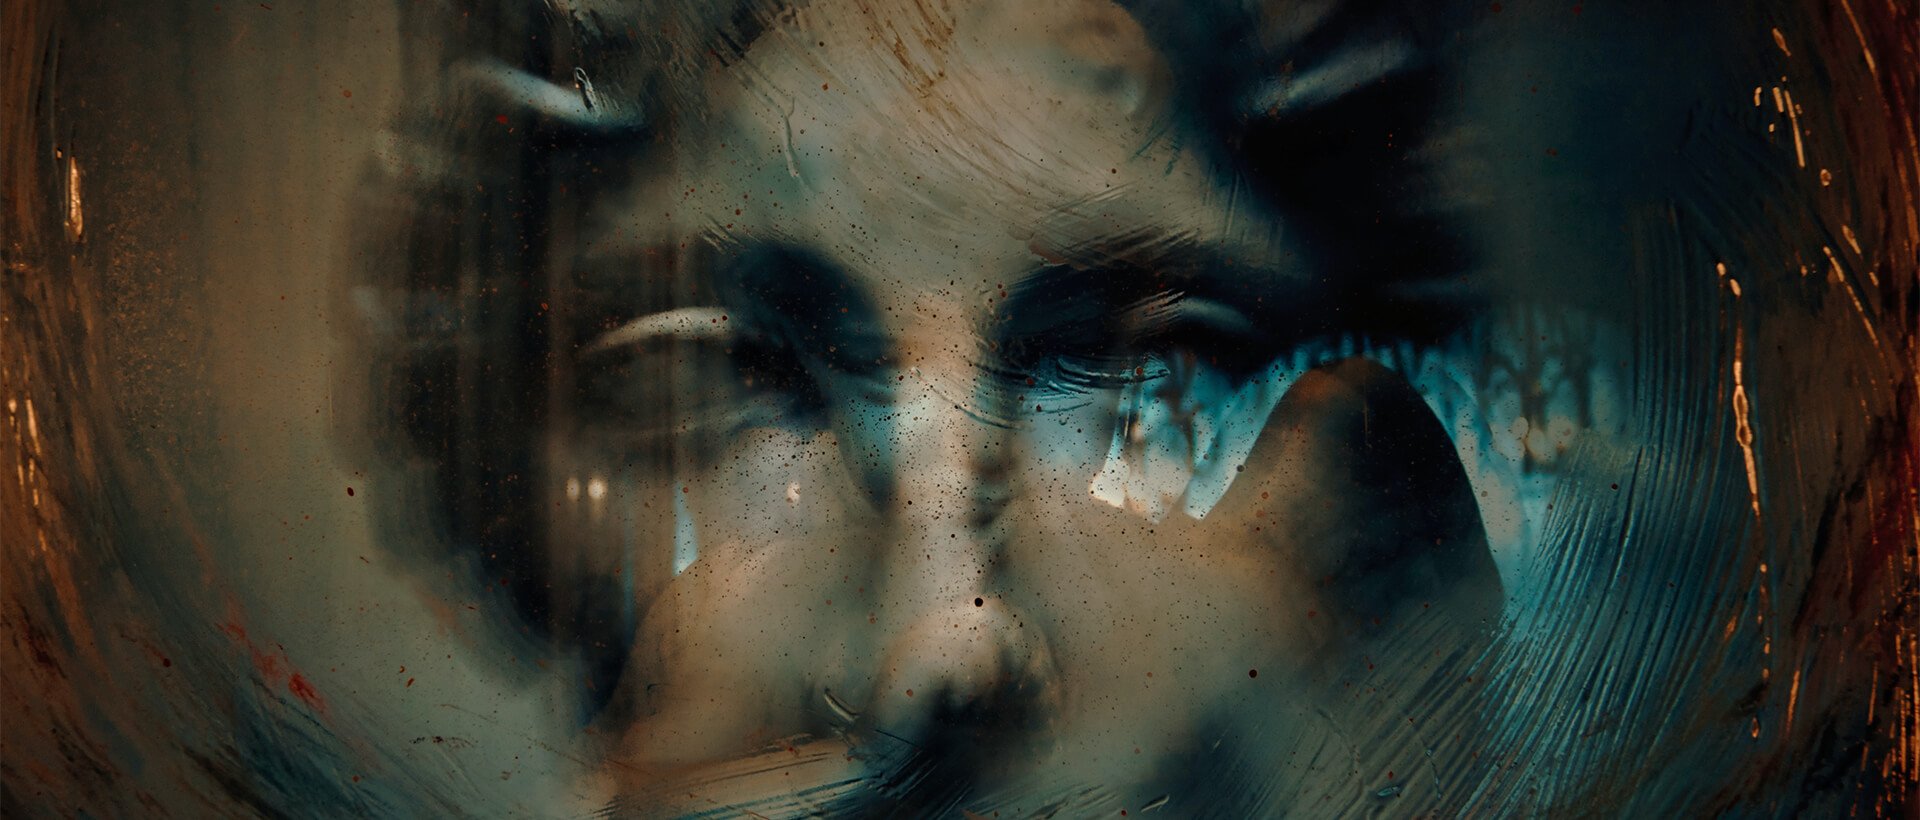 a blurry image of a woman's face and hands.